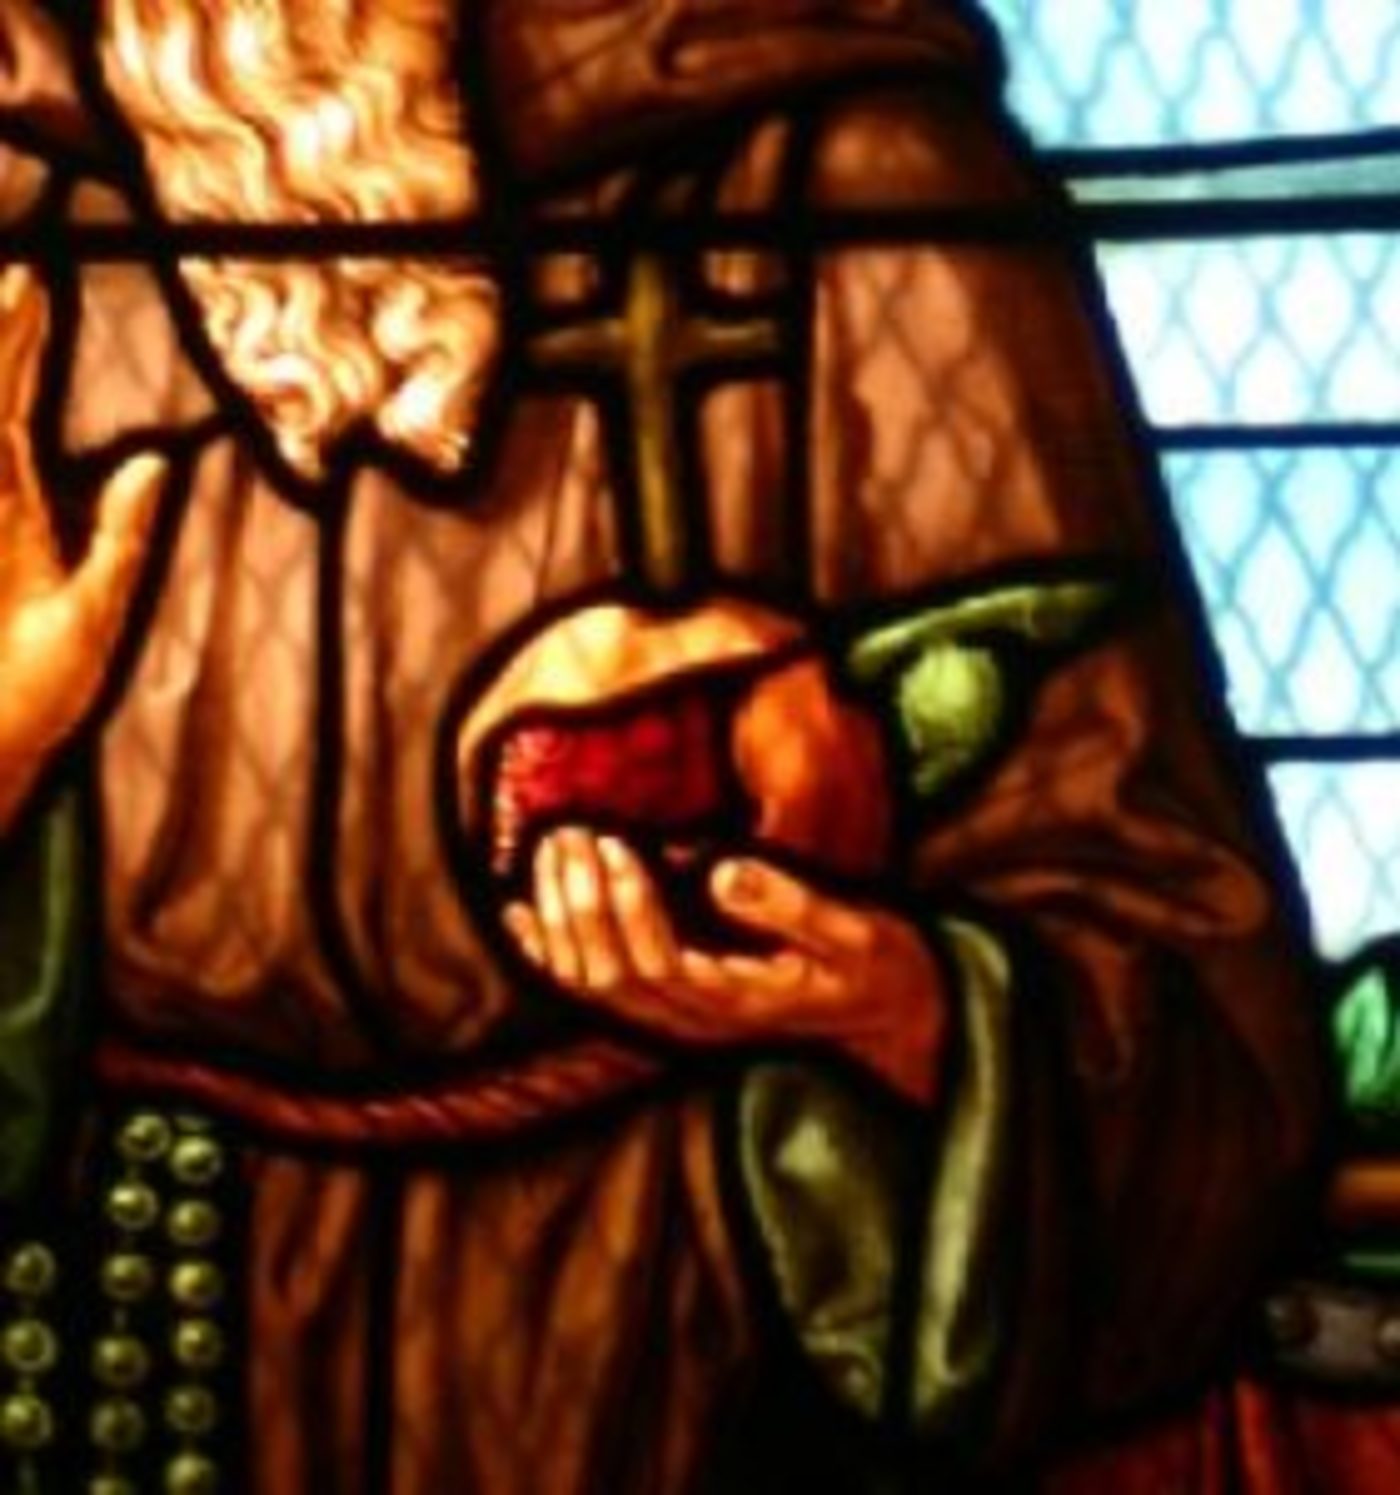 Windows 14A and 14B: St. Anthony of Padua and St. John of God